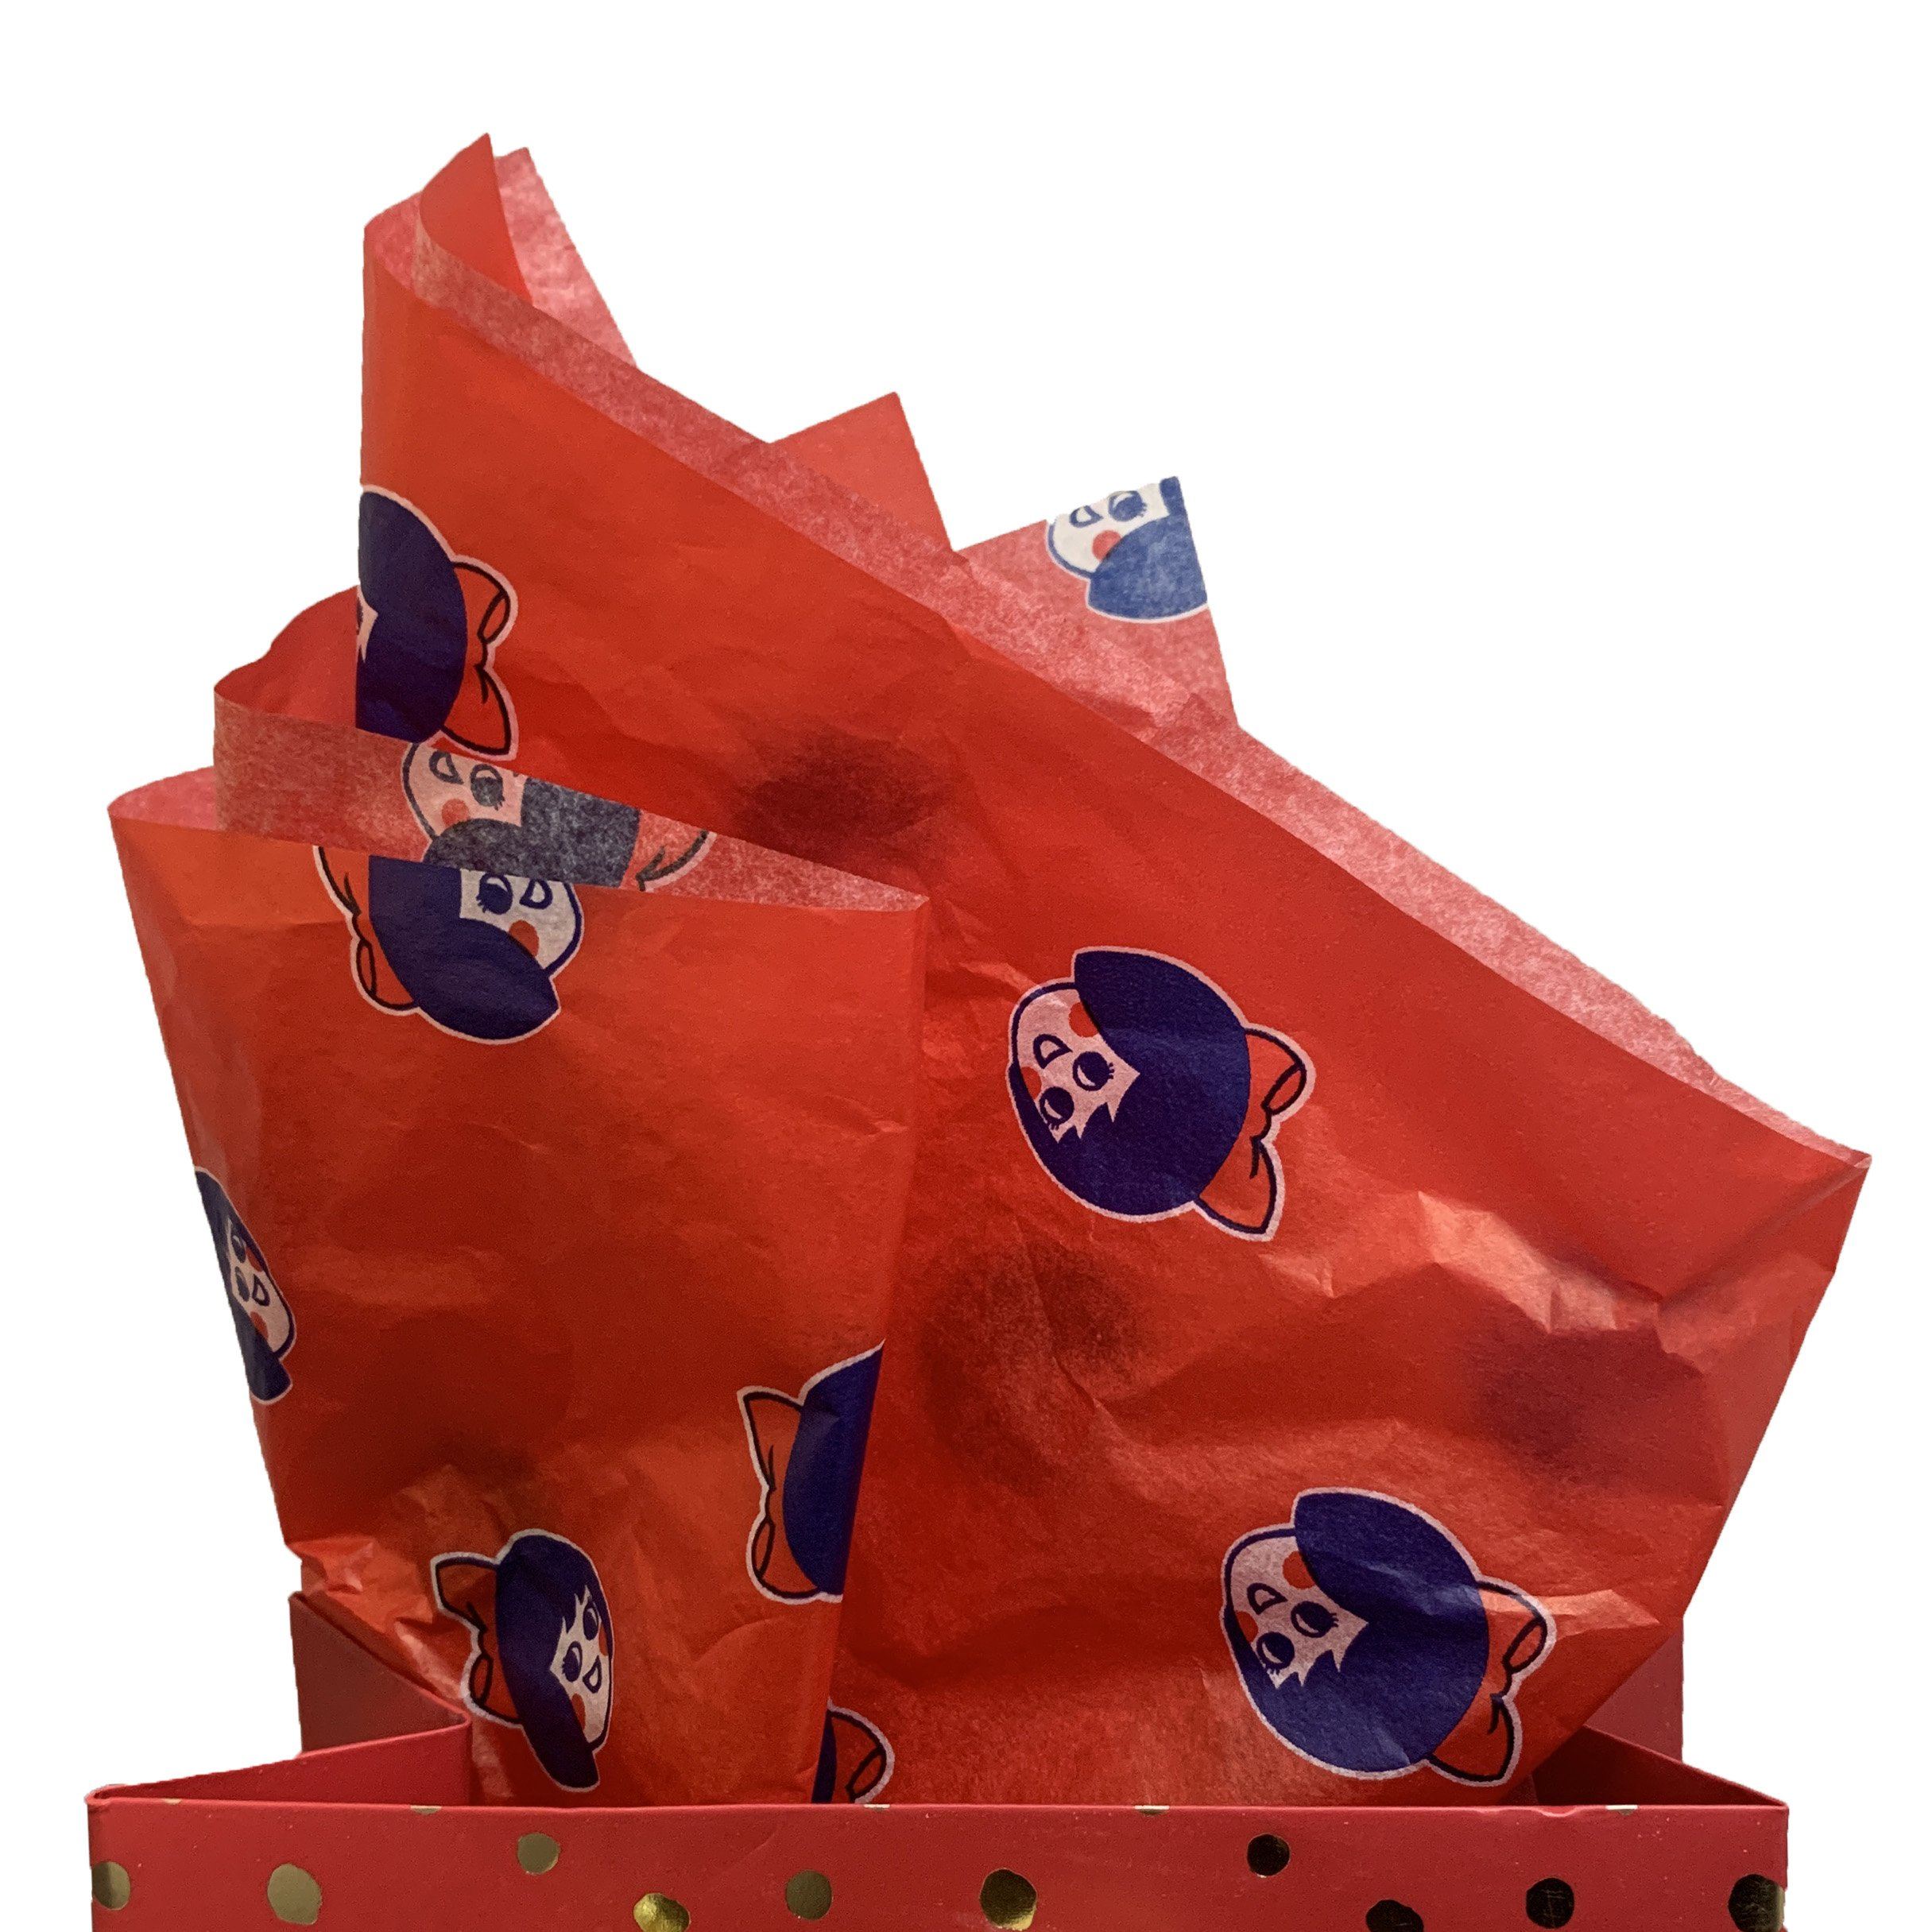 Utz Girl Logo (Red) / Tissue Paper Pack - Route One Apparel